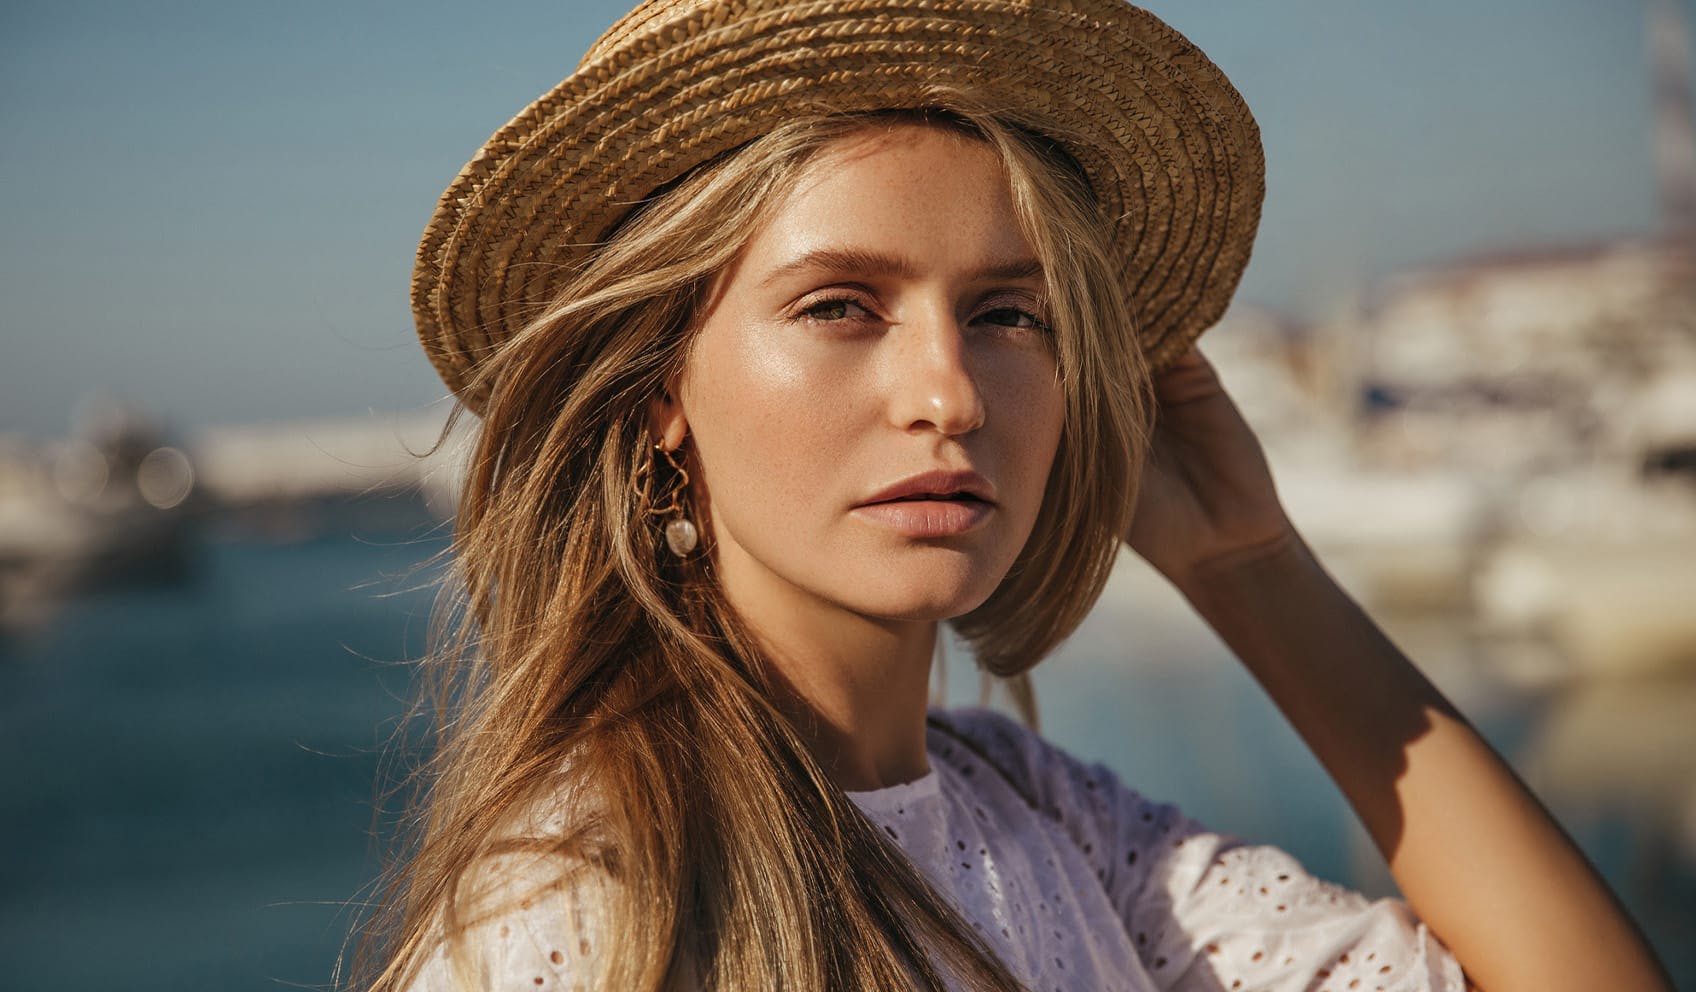 Beautiful woman staring off into the distance wearing straw hat